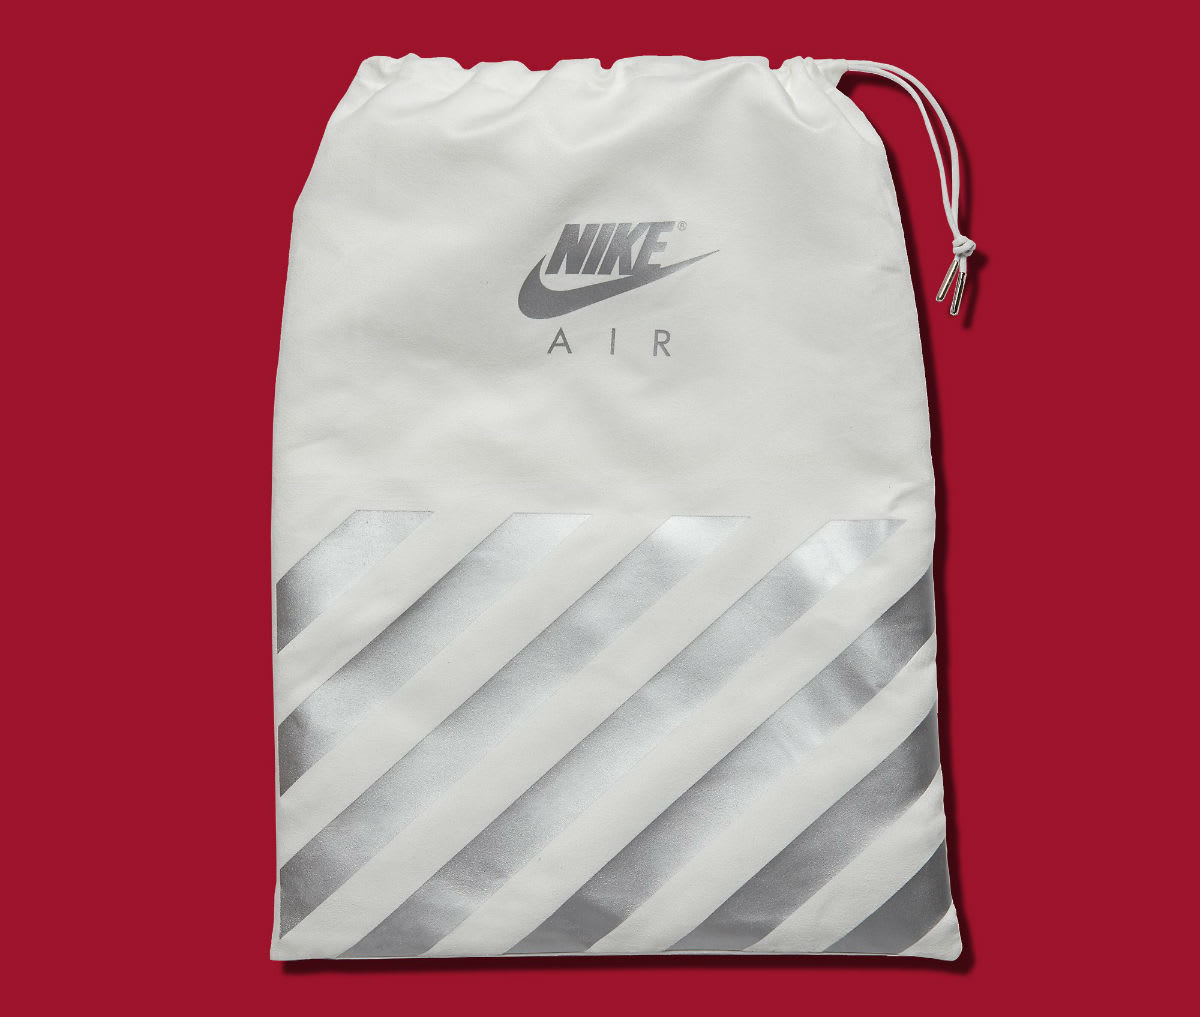 Nike Air Max 1 OG Red Anniversary Release Date Bag 908375-100